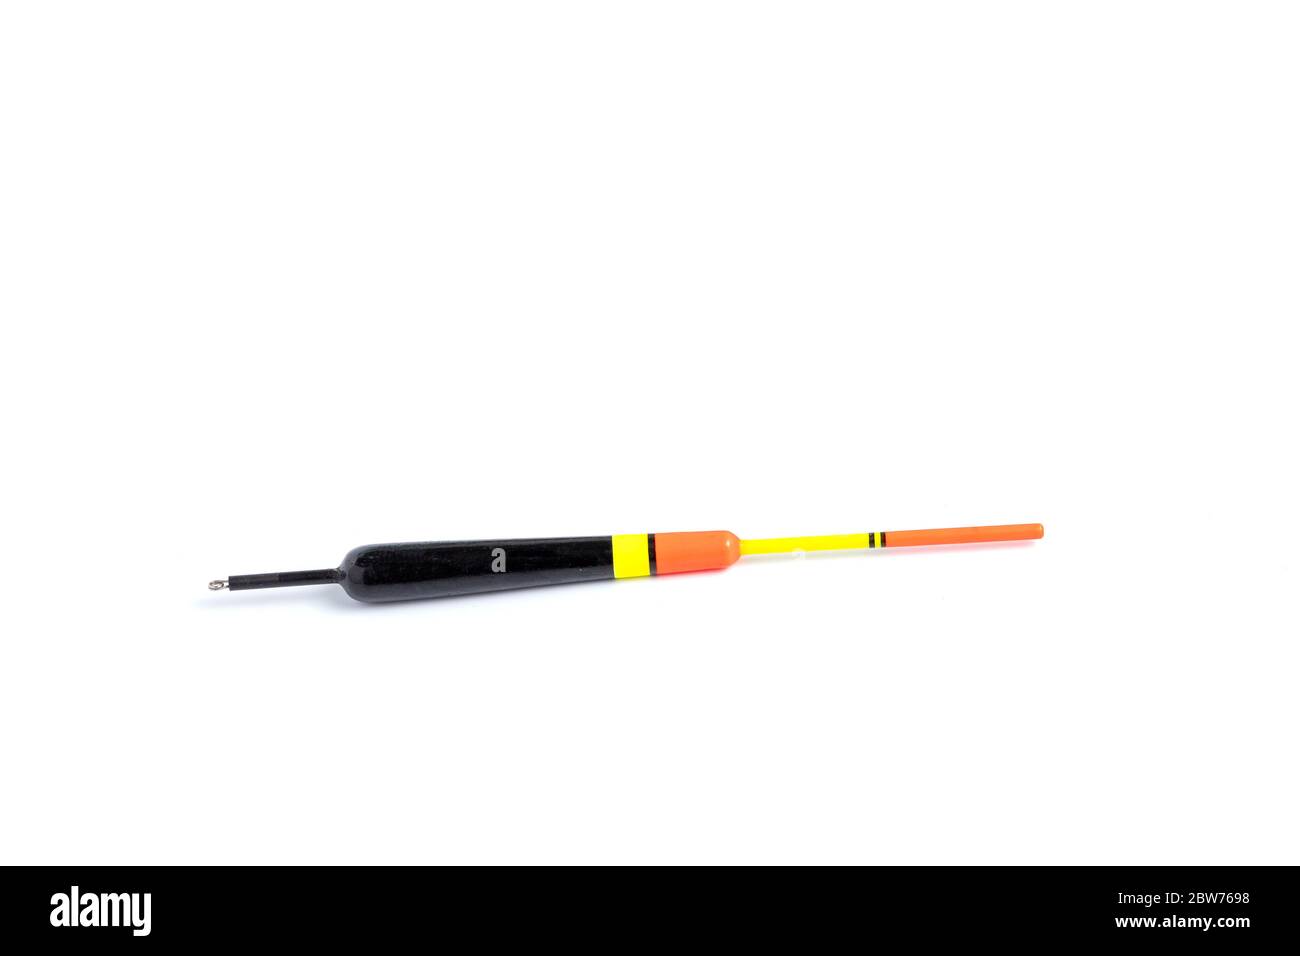 Two fishing bobbers on a white background, one orange and oblong and one  round and red and white in color Stock Photo - Alamy